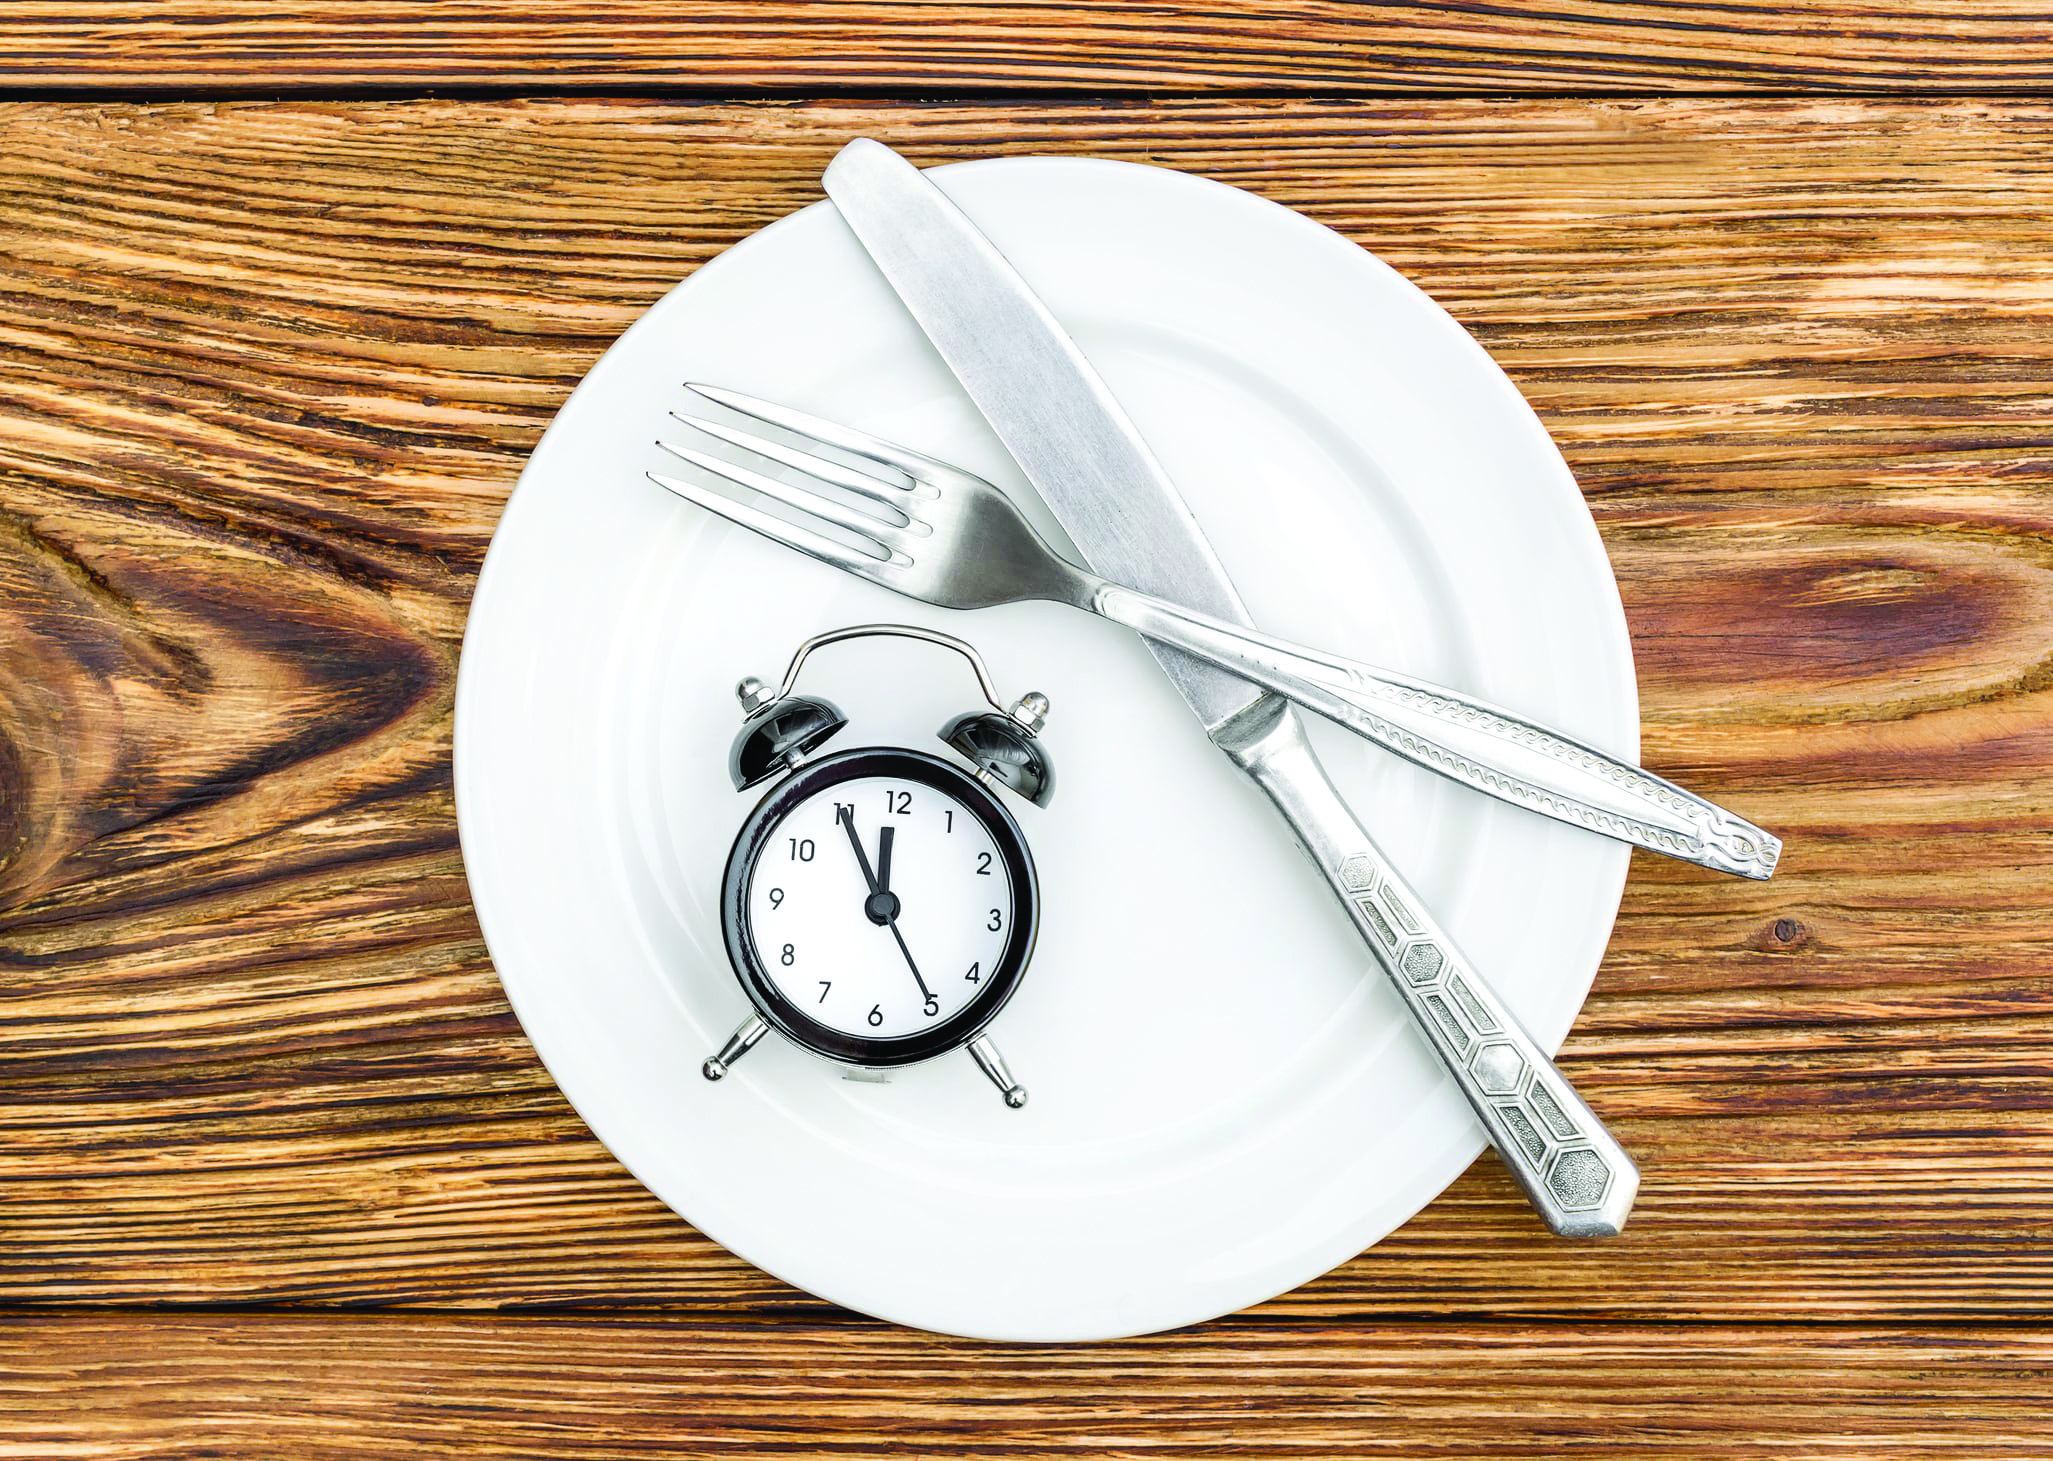 Intermittent Fasting.  Is It for Me?	by Nidaa Hossenlopp